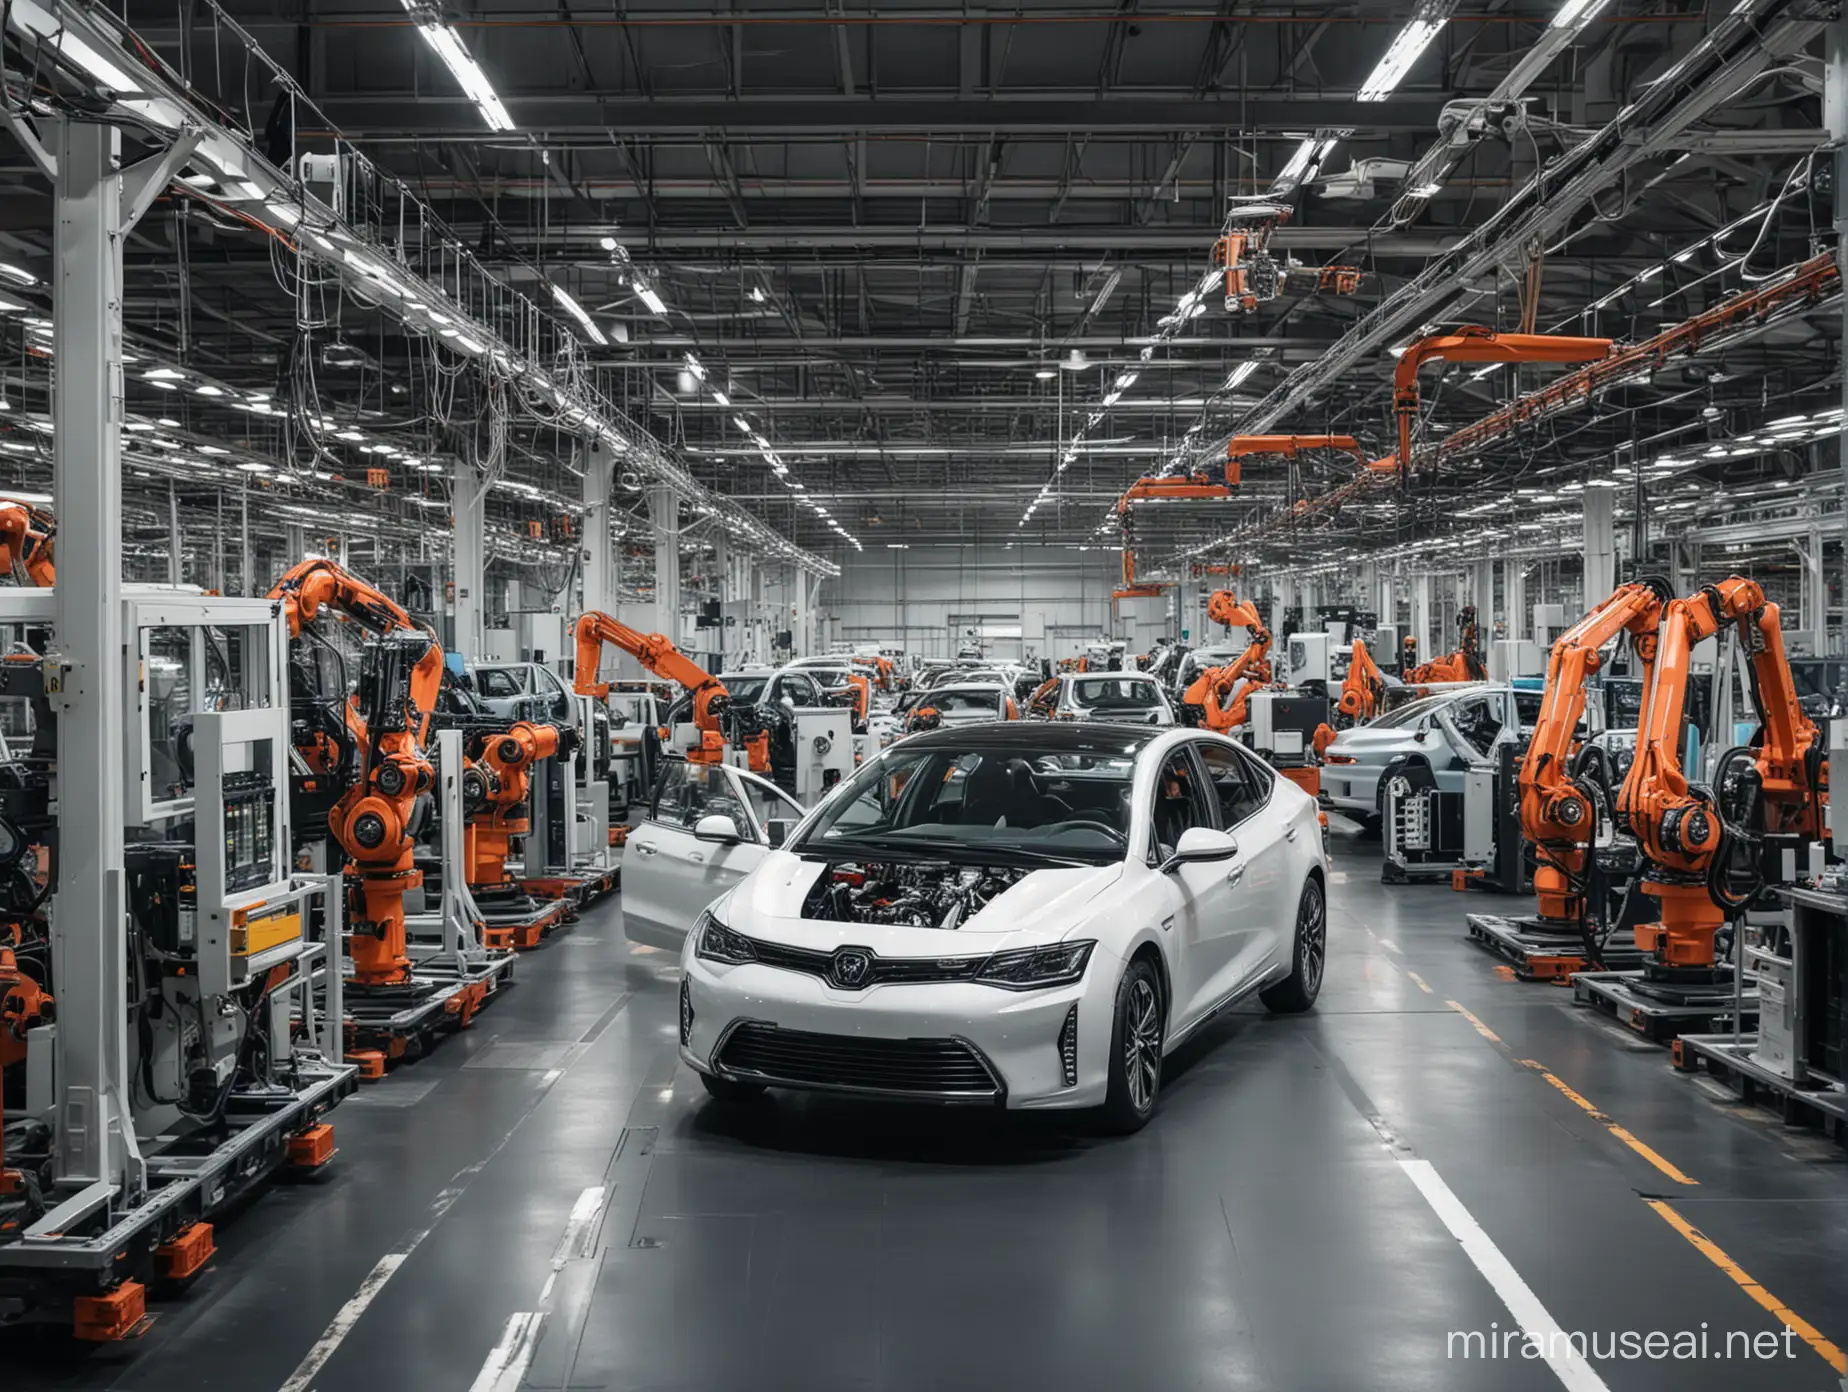 automation in manufacturing cars